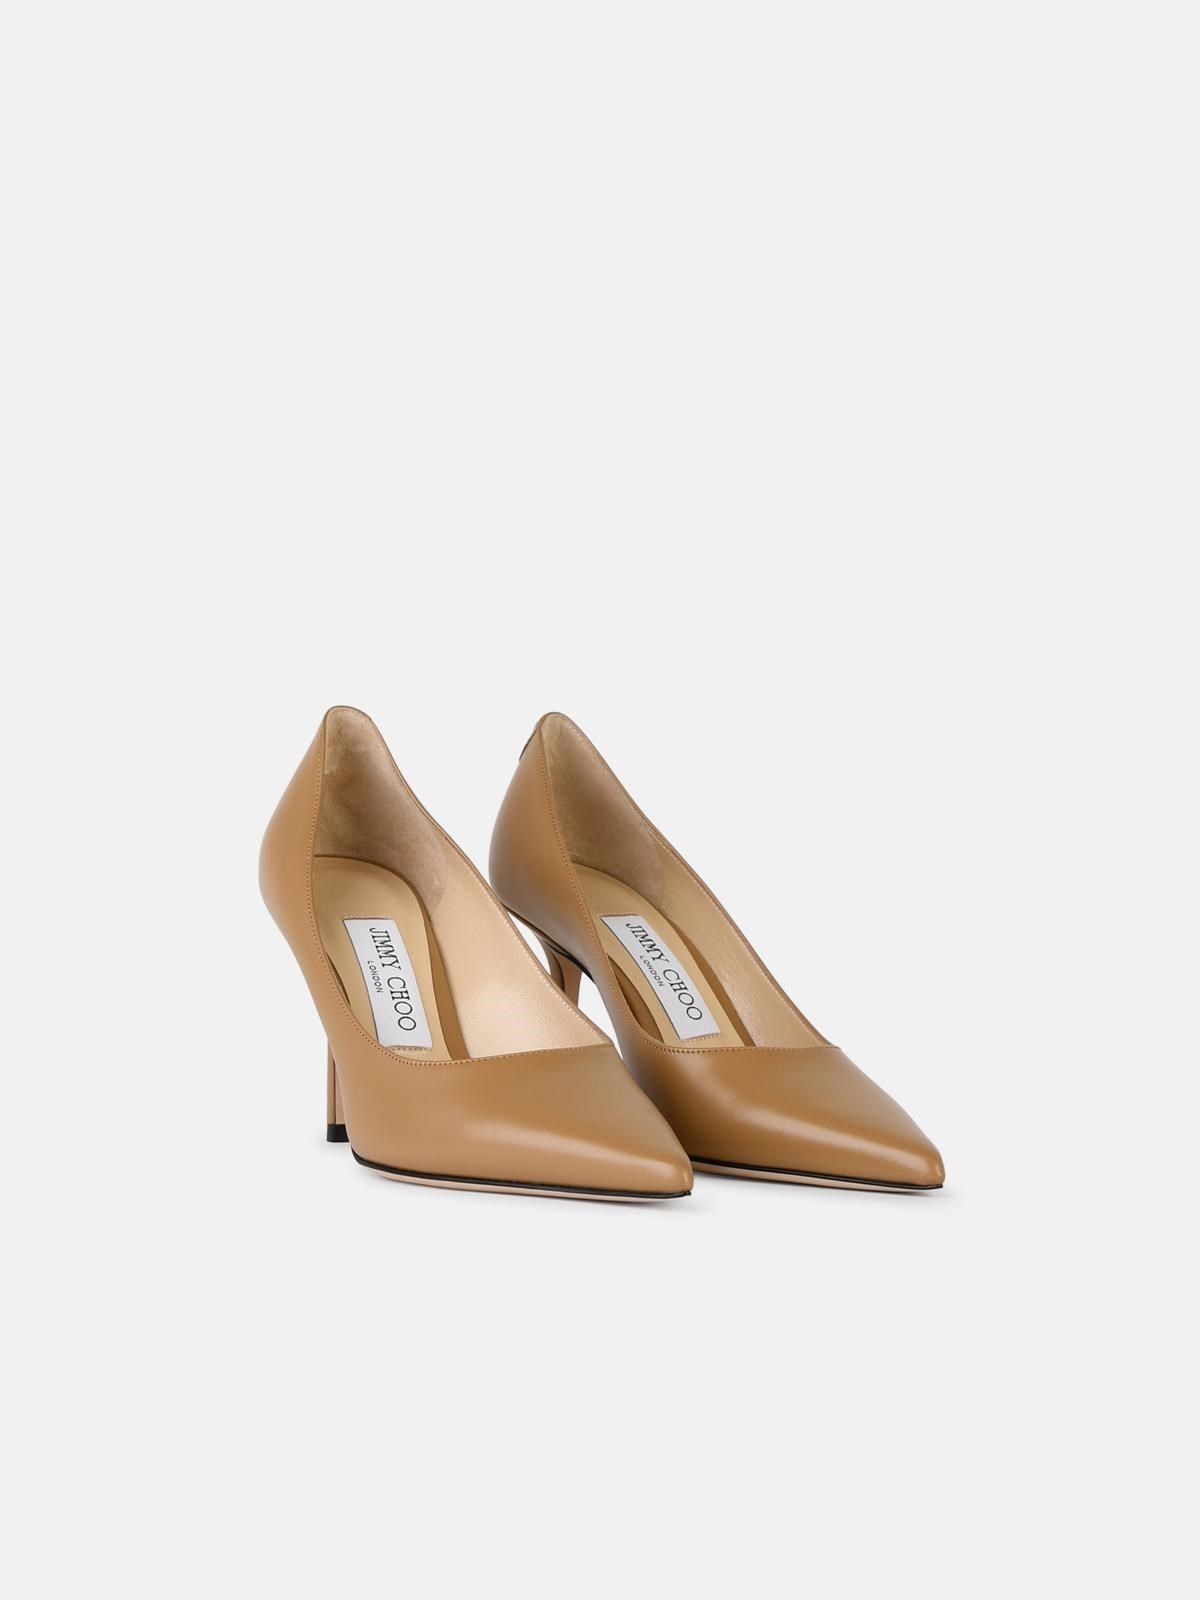 'LOVE 85' BEIGE LEATHER PUMPS - 3